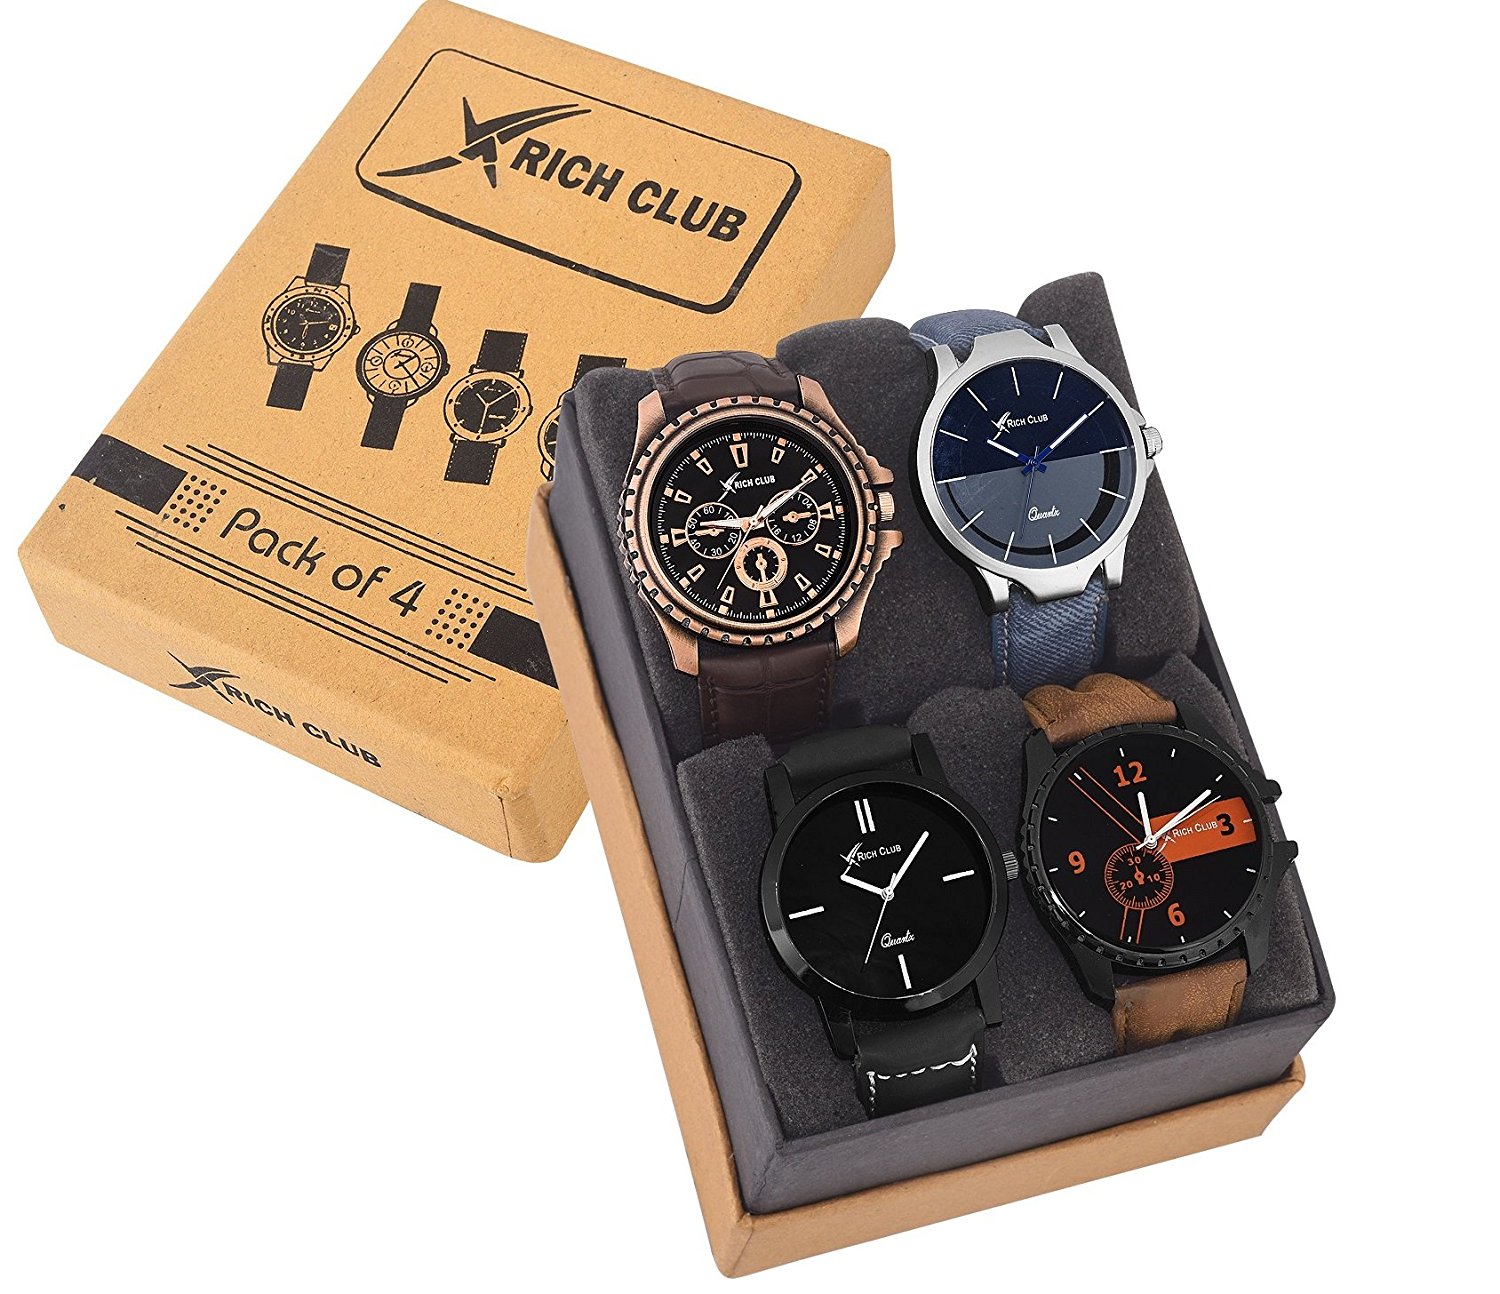 Rich Club Pack Of 4 Multicolour Analog Analog Watch For Men And Boys Price in India